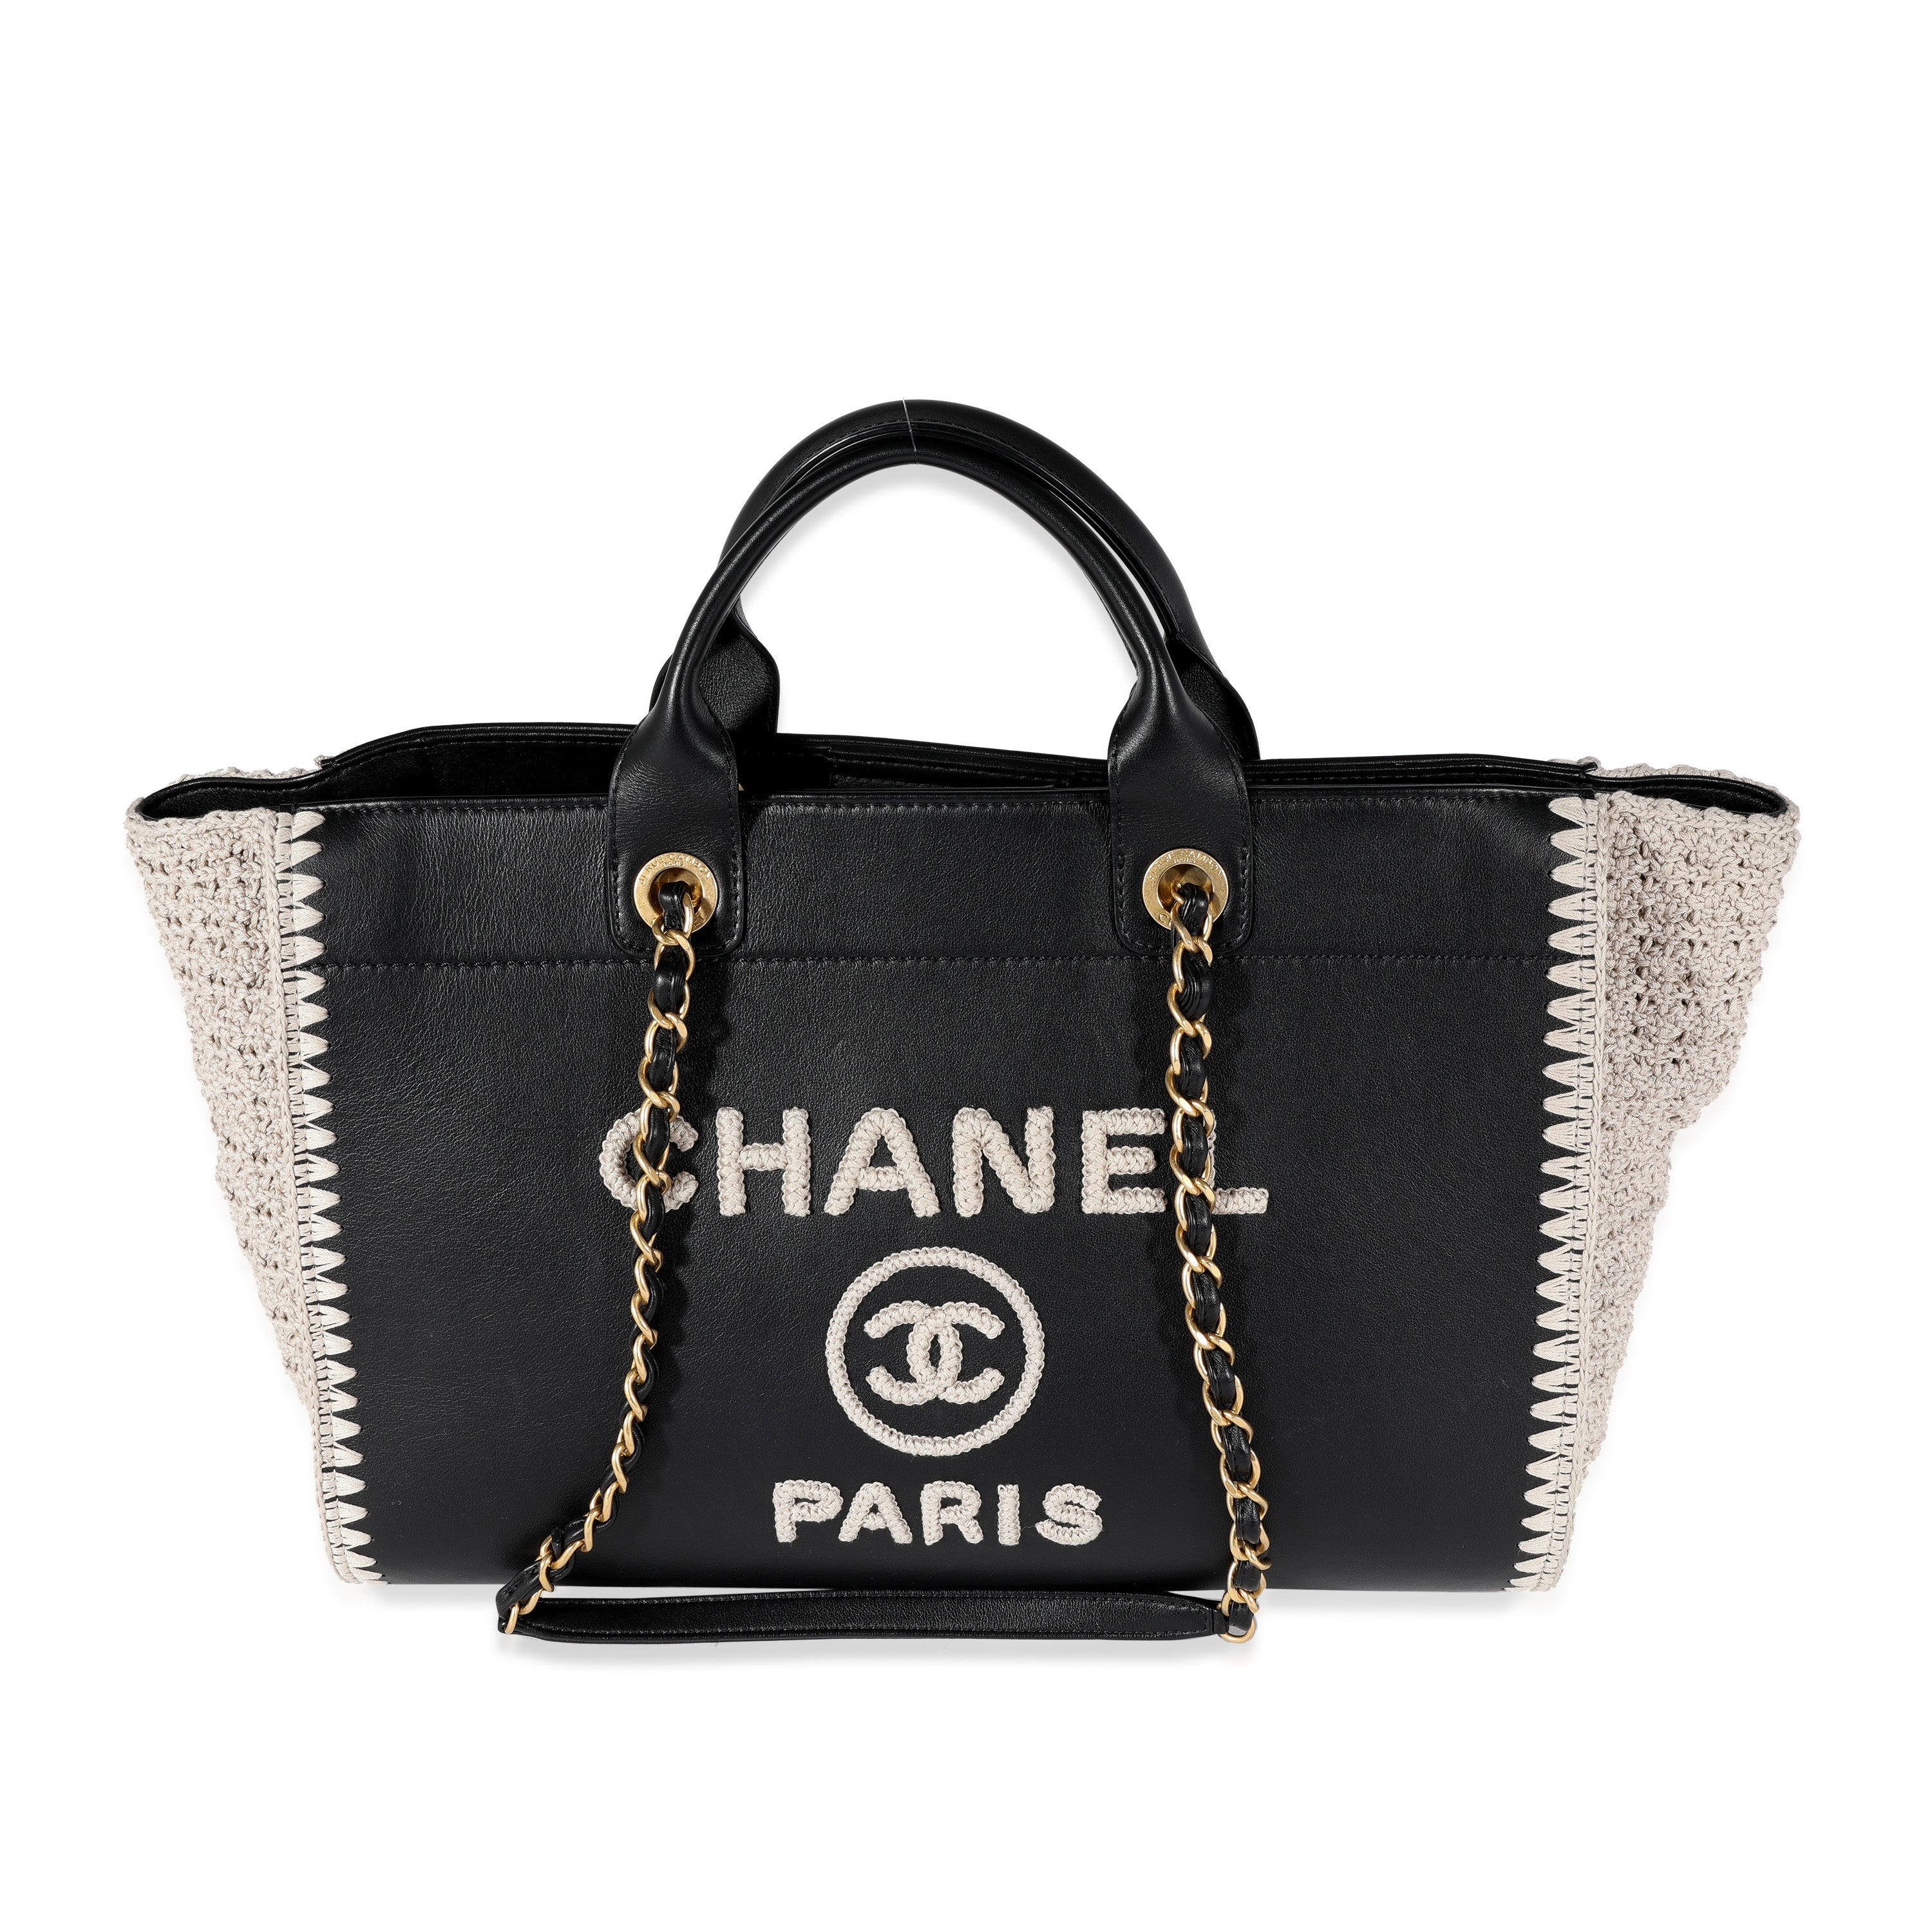 Chanel Black Leather & Beige Crochet Large Deauville Tote